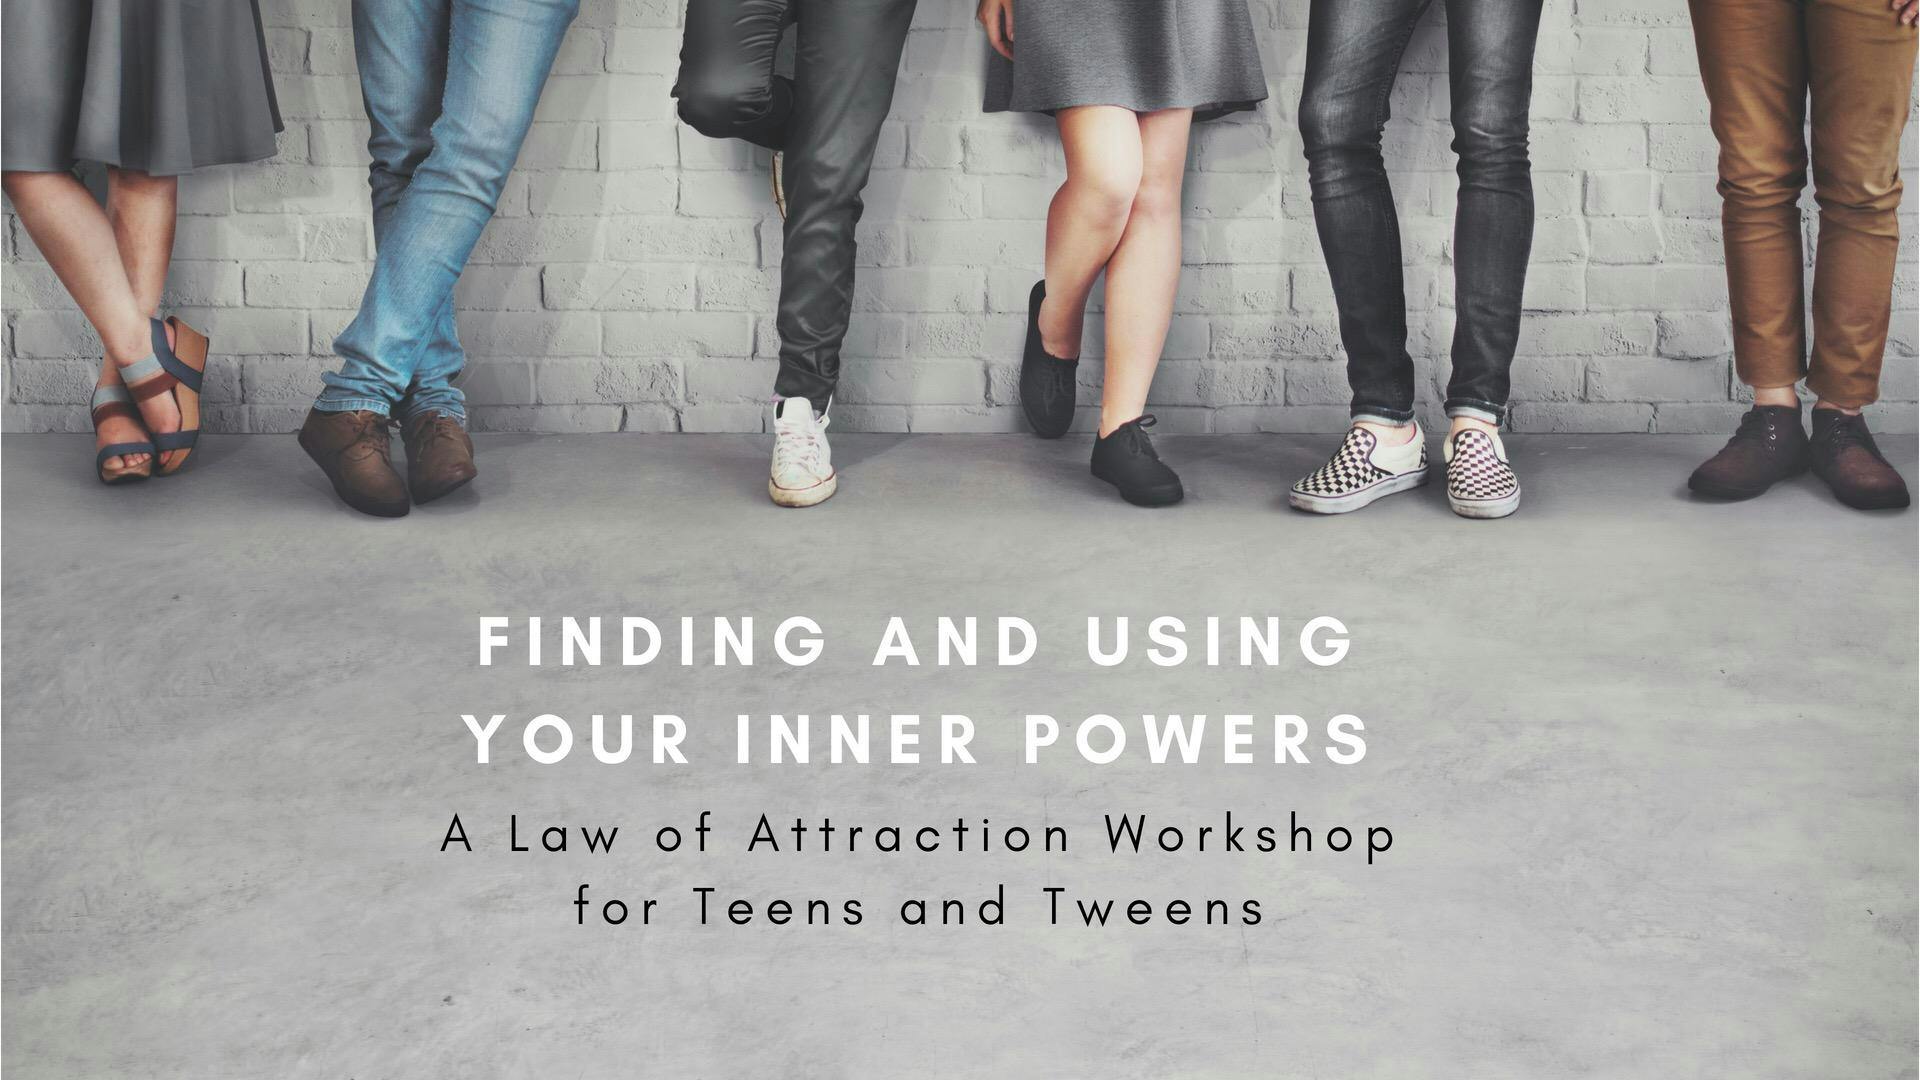 Finding and Using your Inner Powers. A Law of Attraction Workshop for Teens